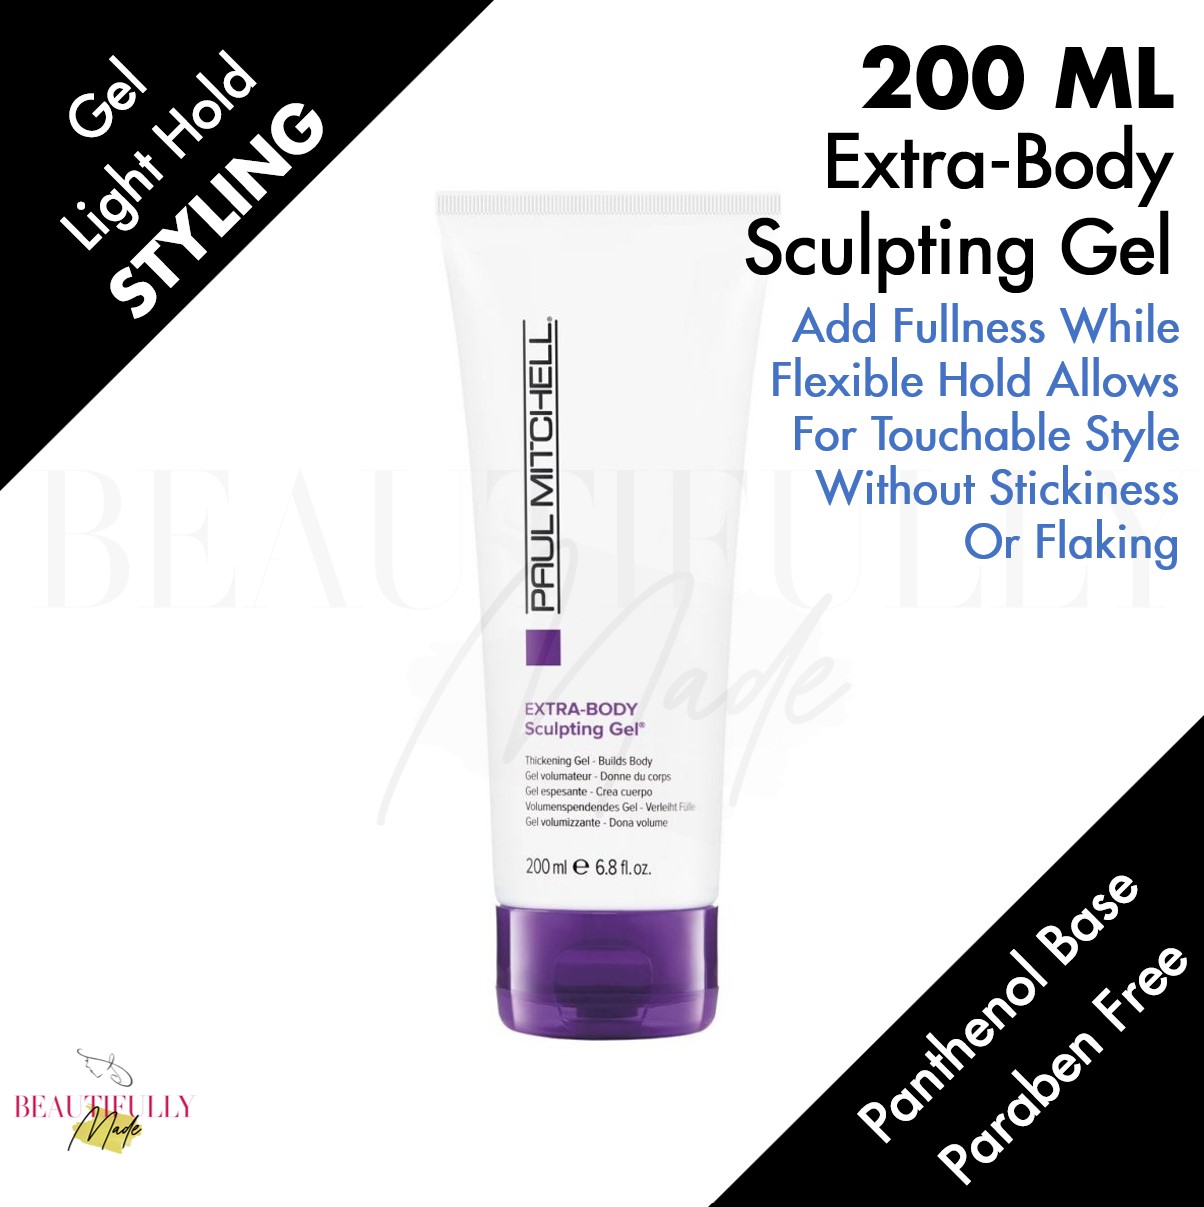 Paul Mitchell Extra Body Sculpting Gel 200ml - Thickening Gel Pump up the  volume with this body-building hair gel, without stickiness or flaking Extra -Body